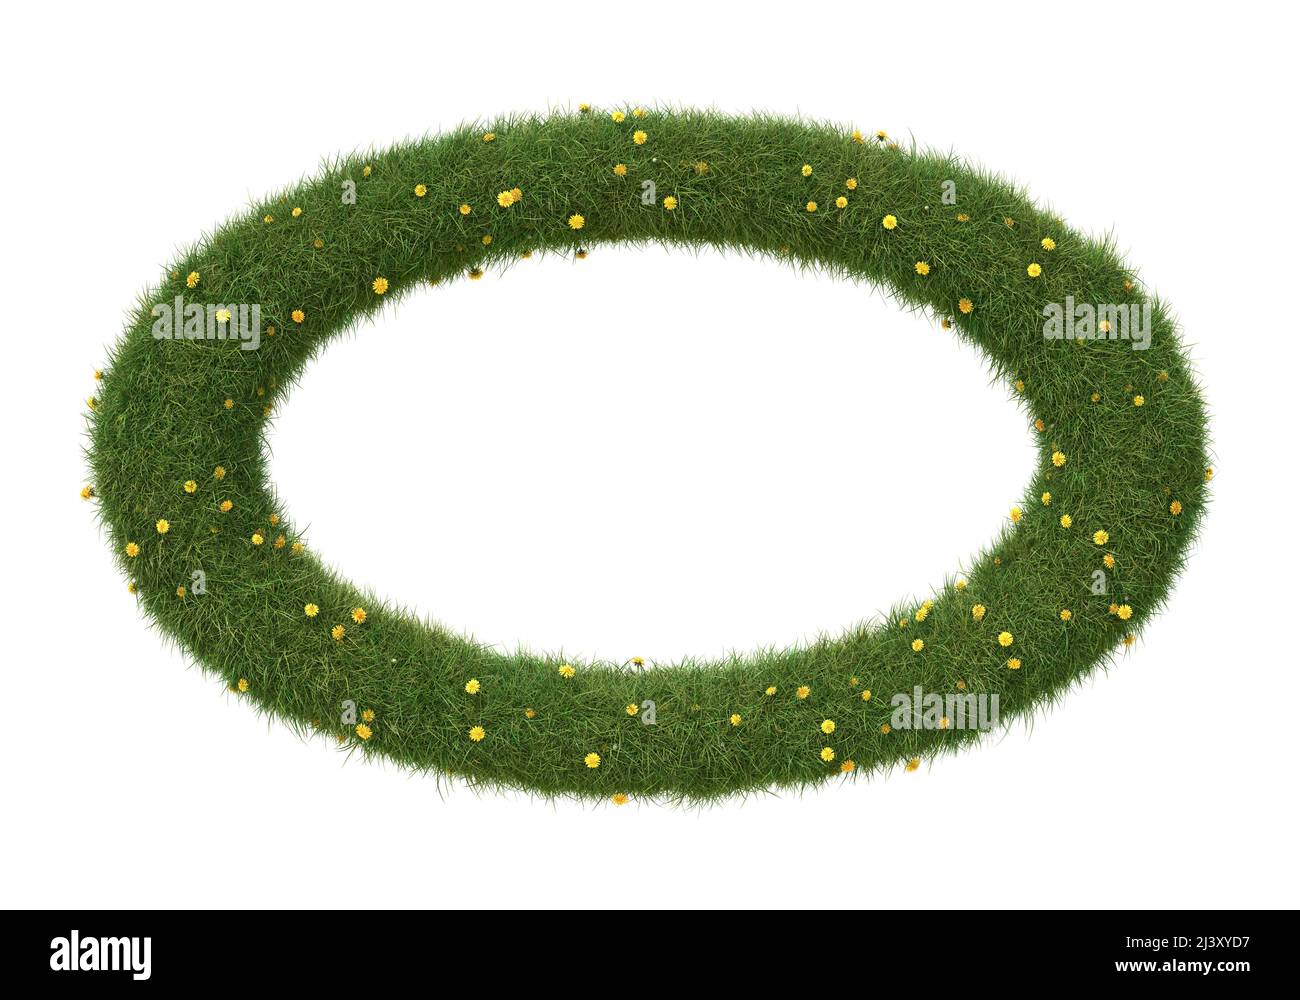 Ellipse shape frame made of grass and dandelions, isolated on white. 3D image Stock Photo